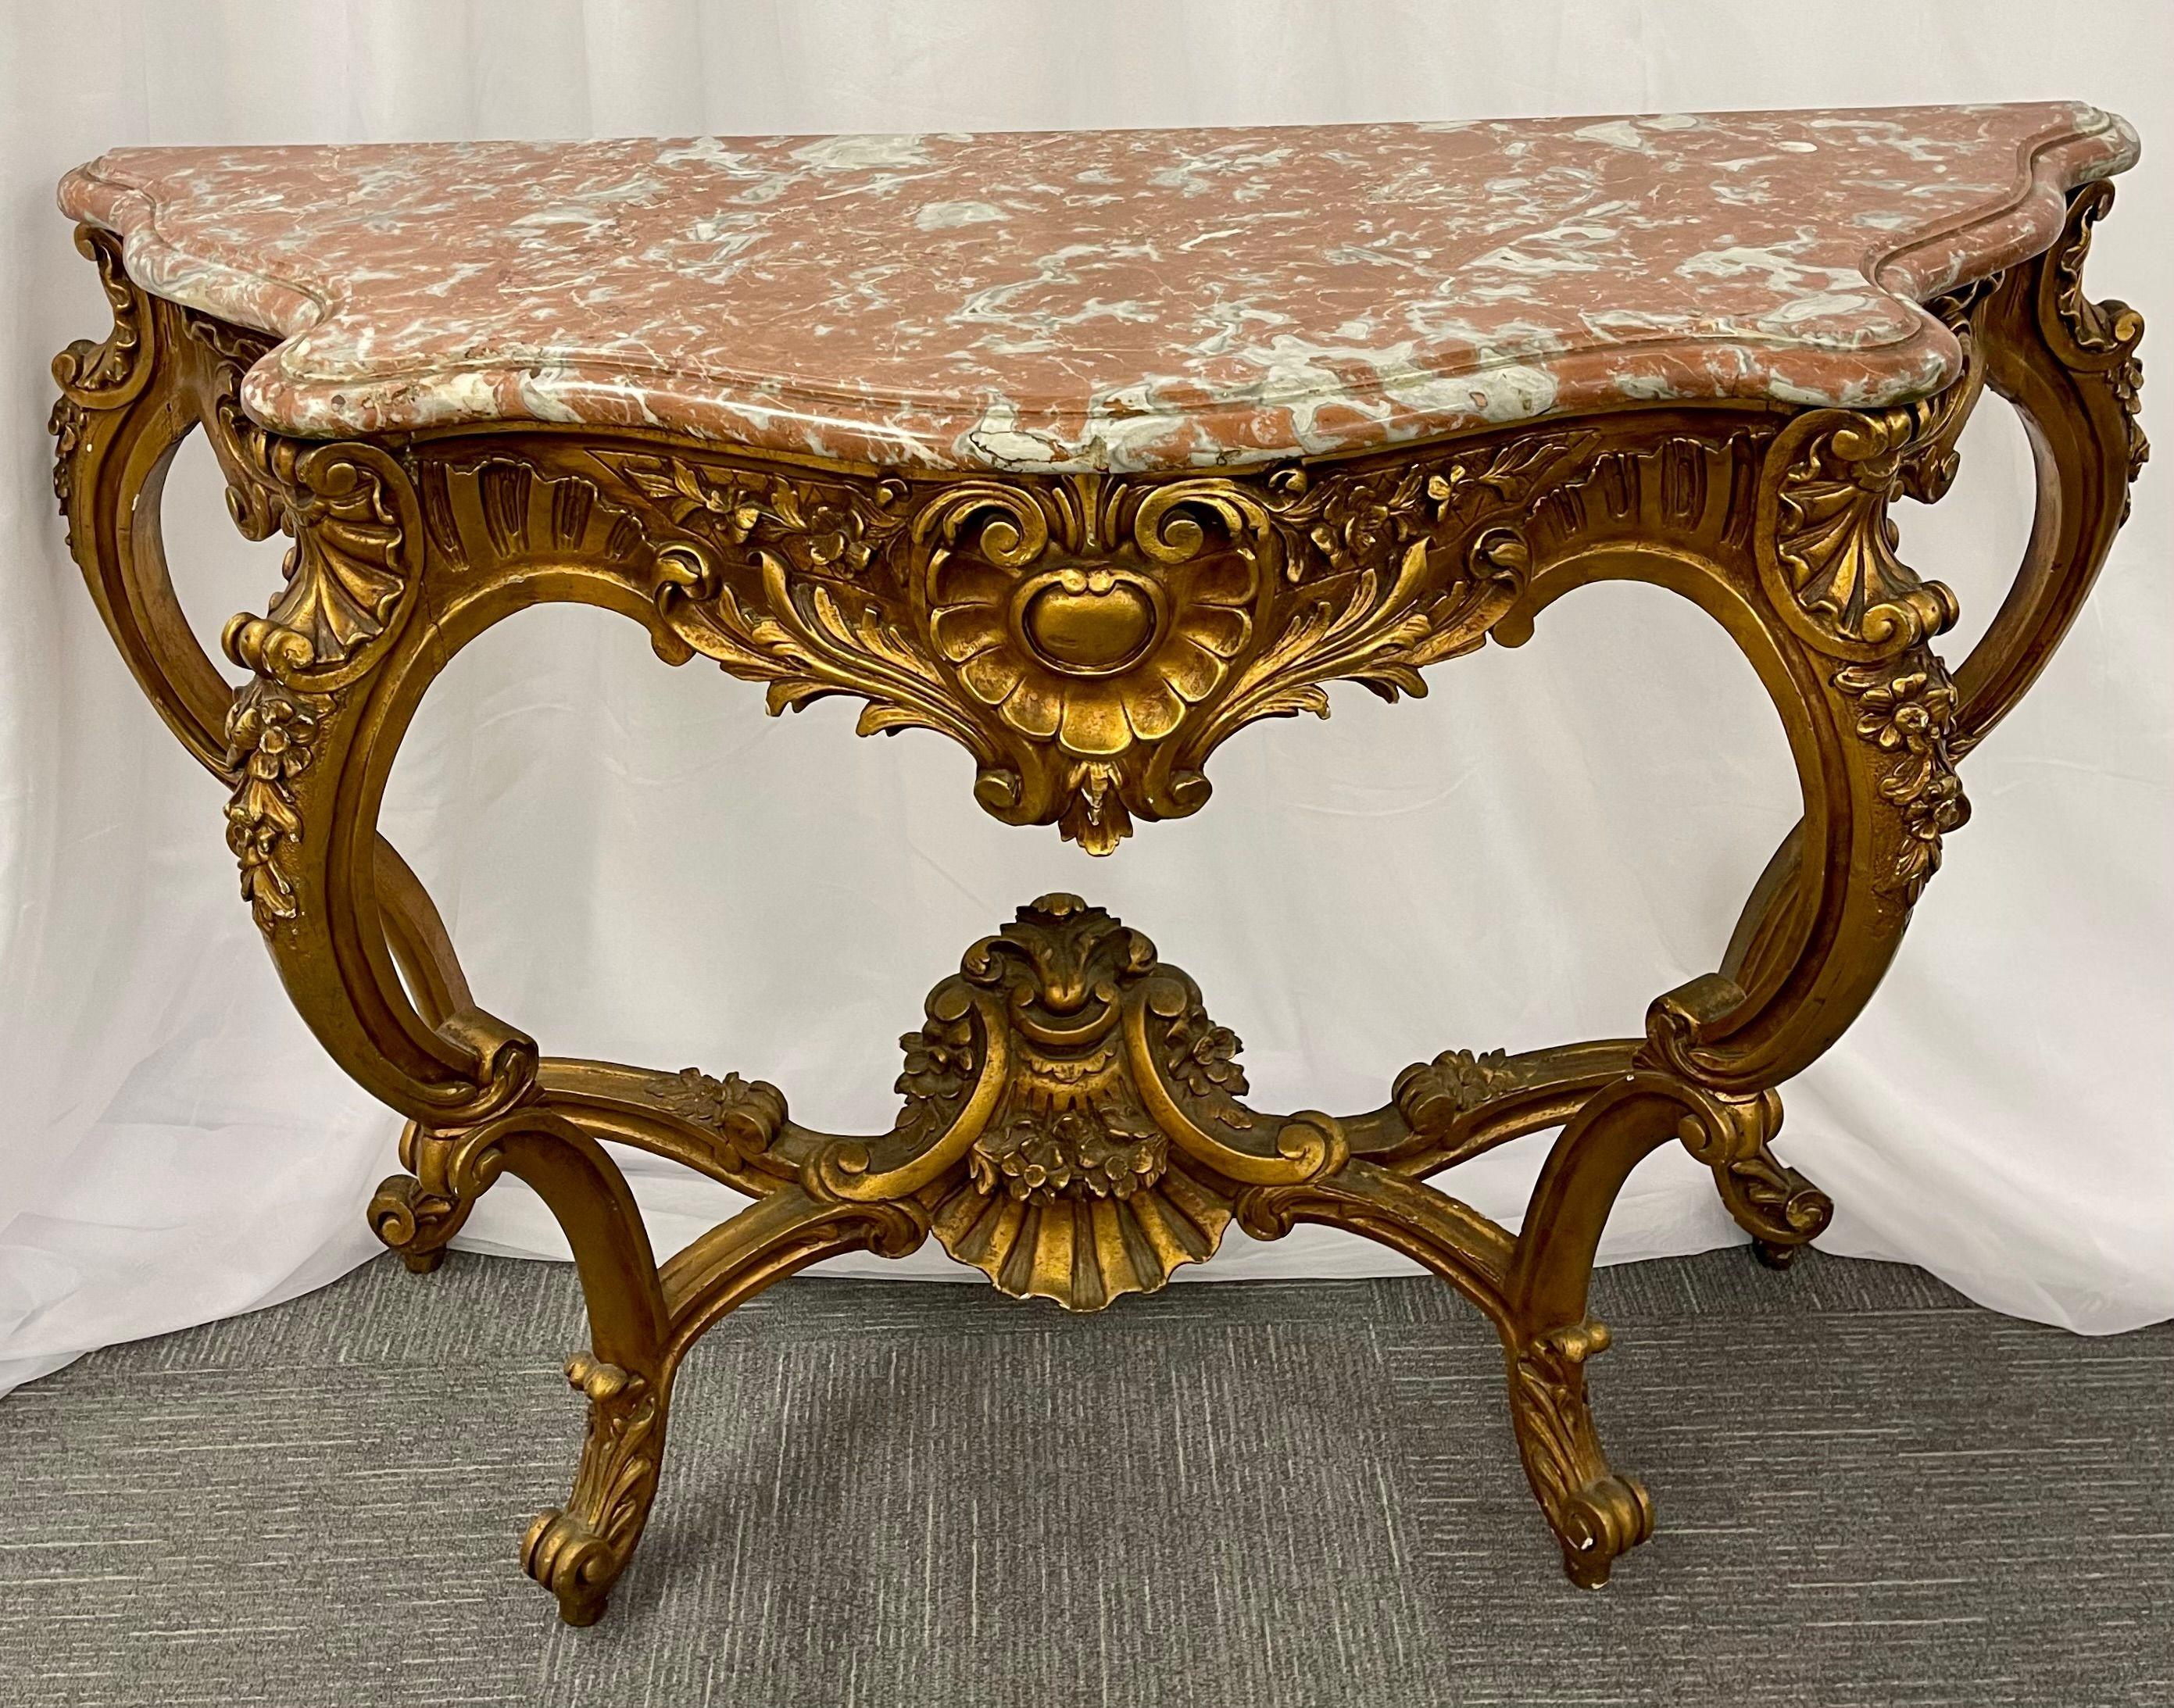 Marble-top Louis XV style console table by Jansen. This is a fine and early example of French design at its best. This Louis XV style console has a deep serpentine design leg with a lower support under-carriage displaying a shell design with flowing